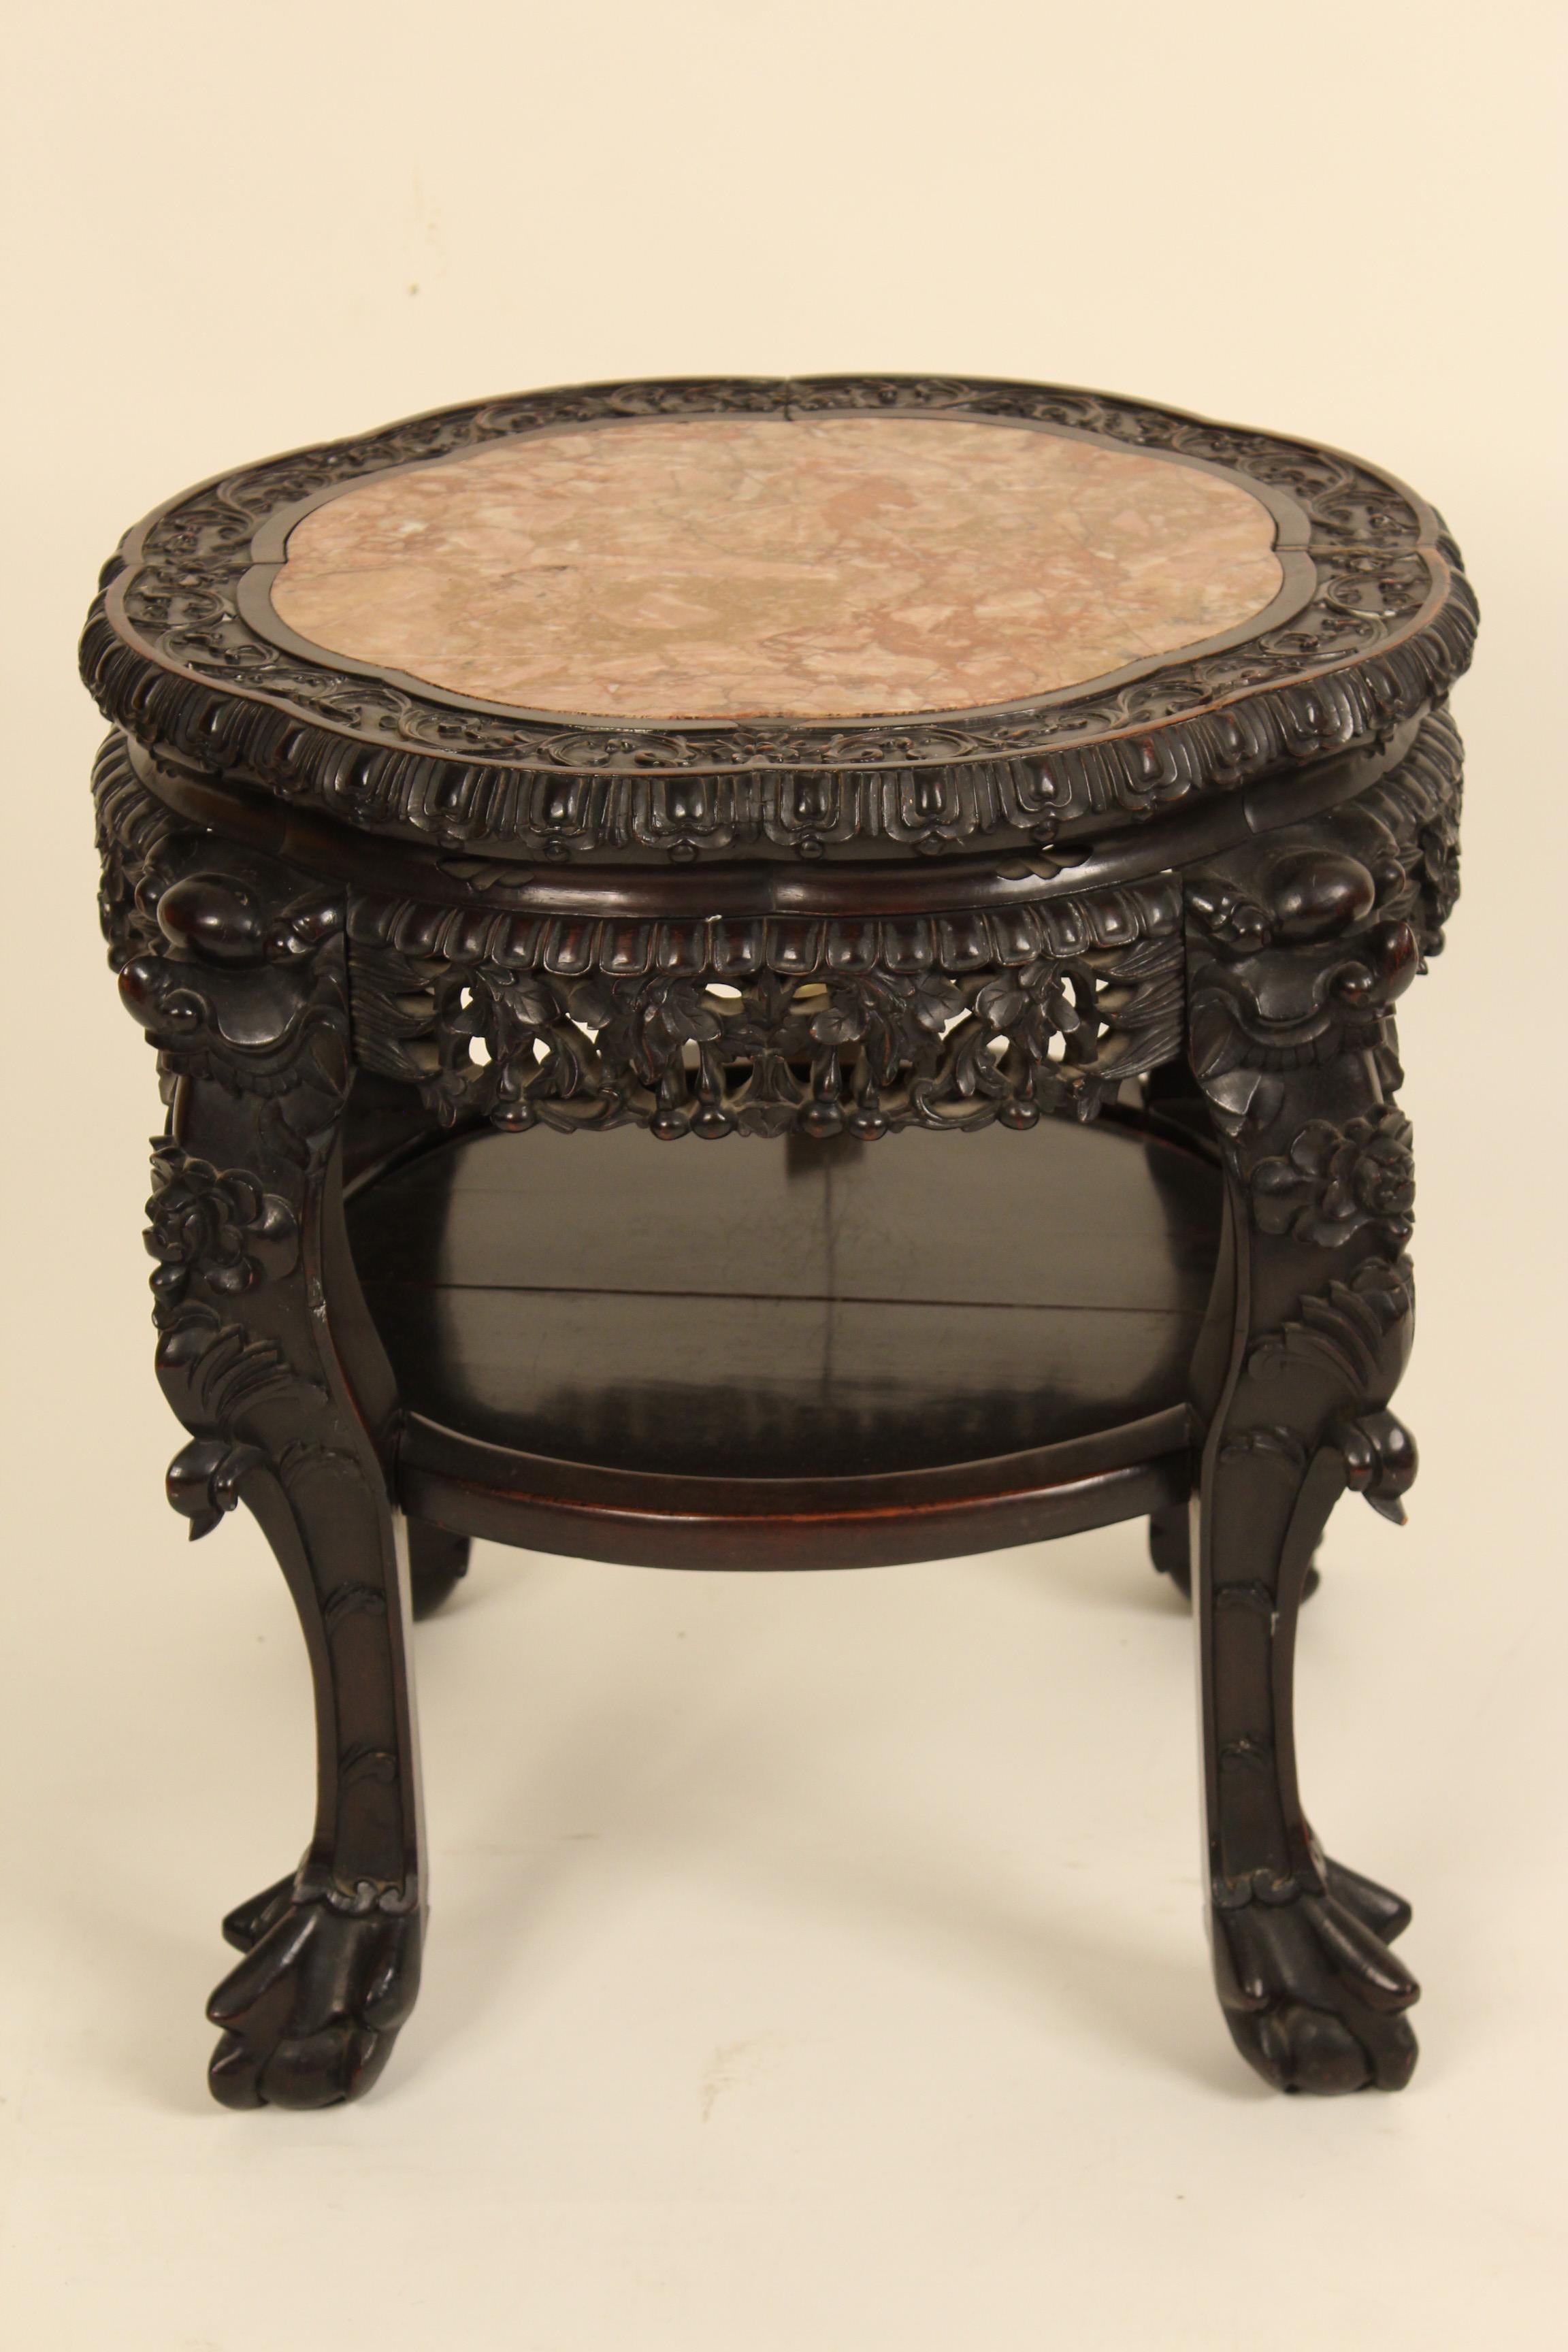 Chinese carved hardwood taboret / occasional table with marble top, circa 1920.